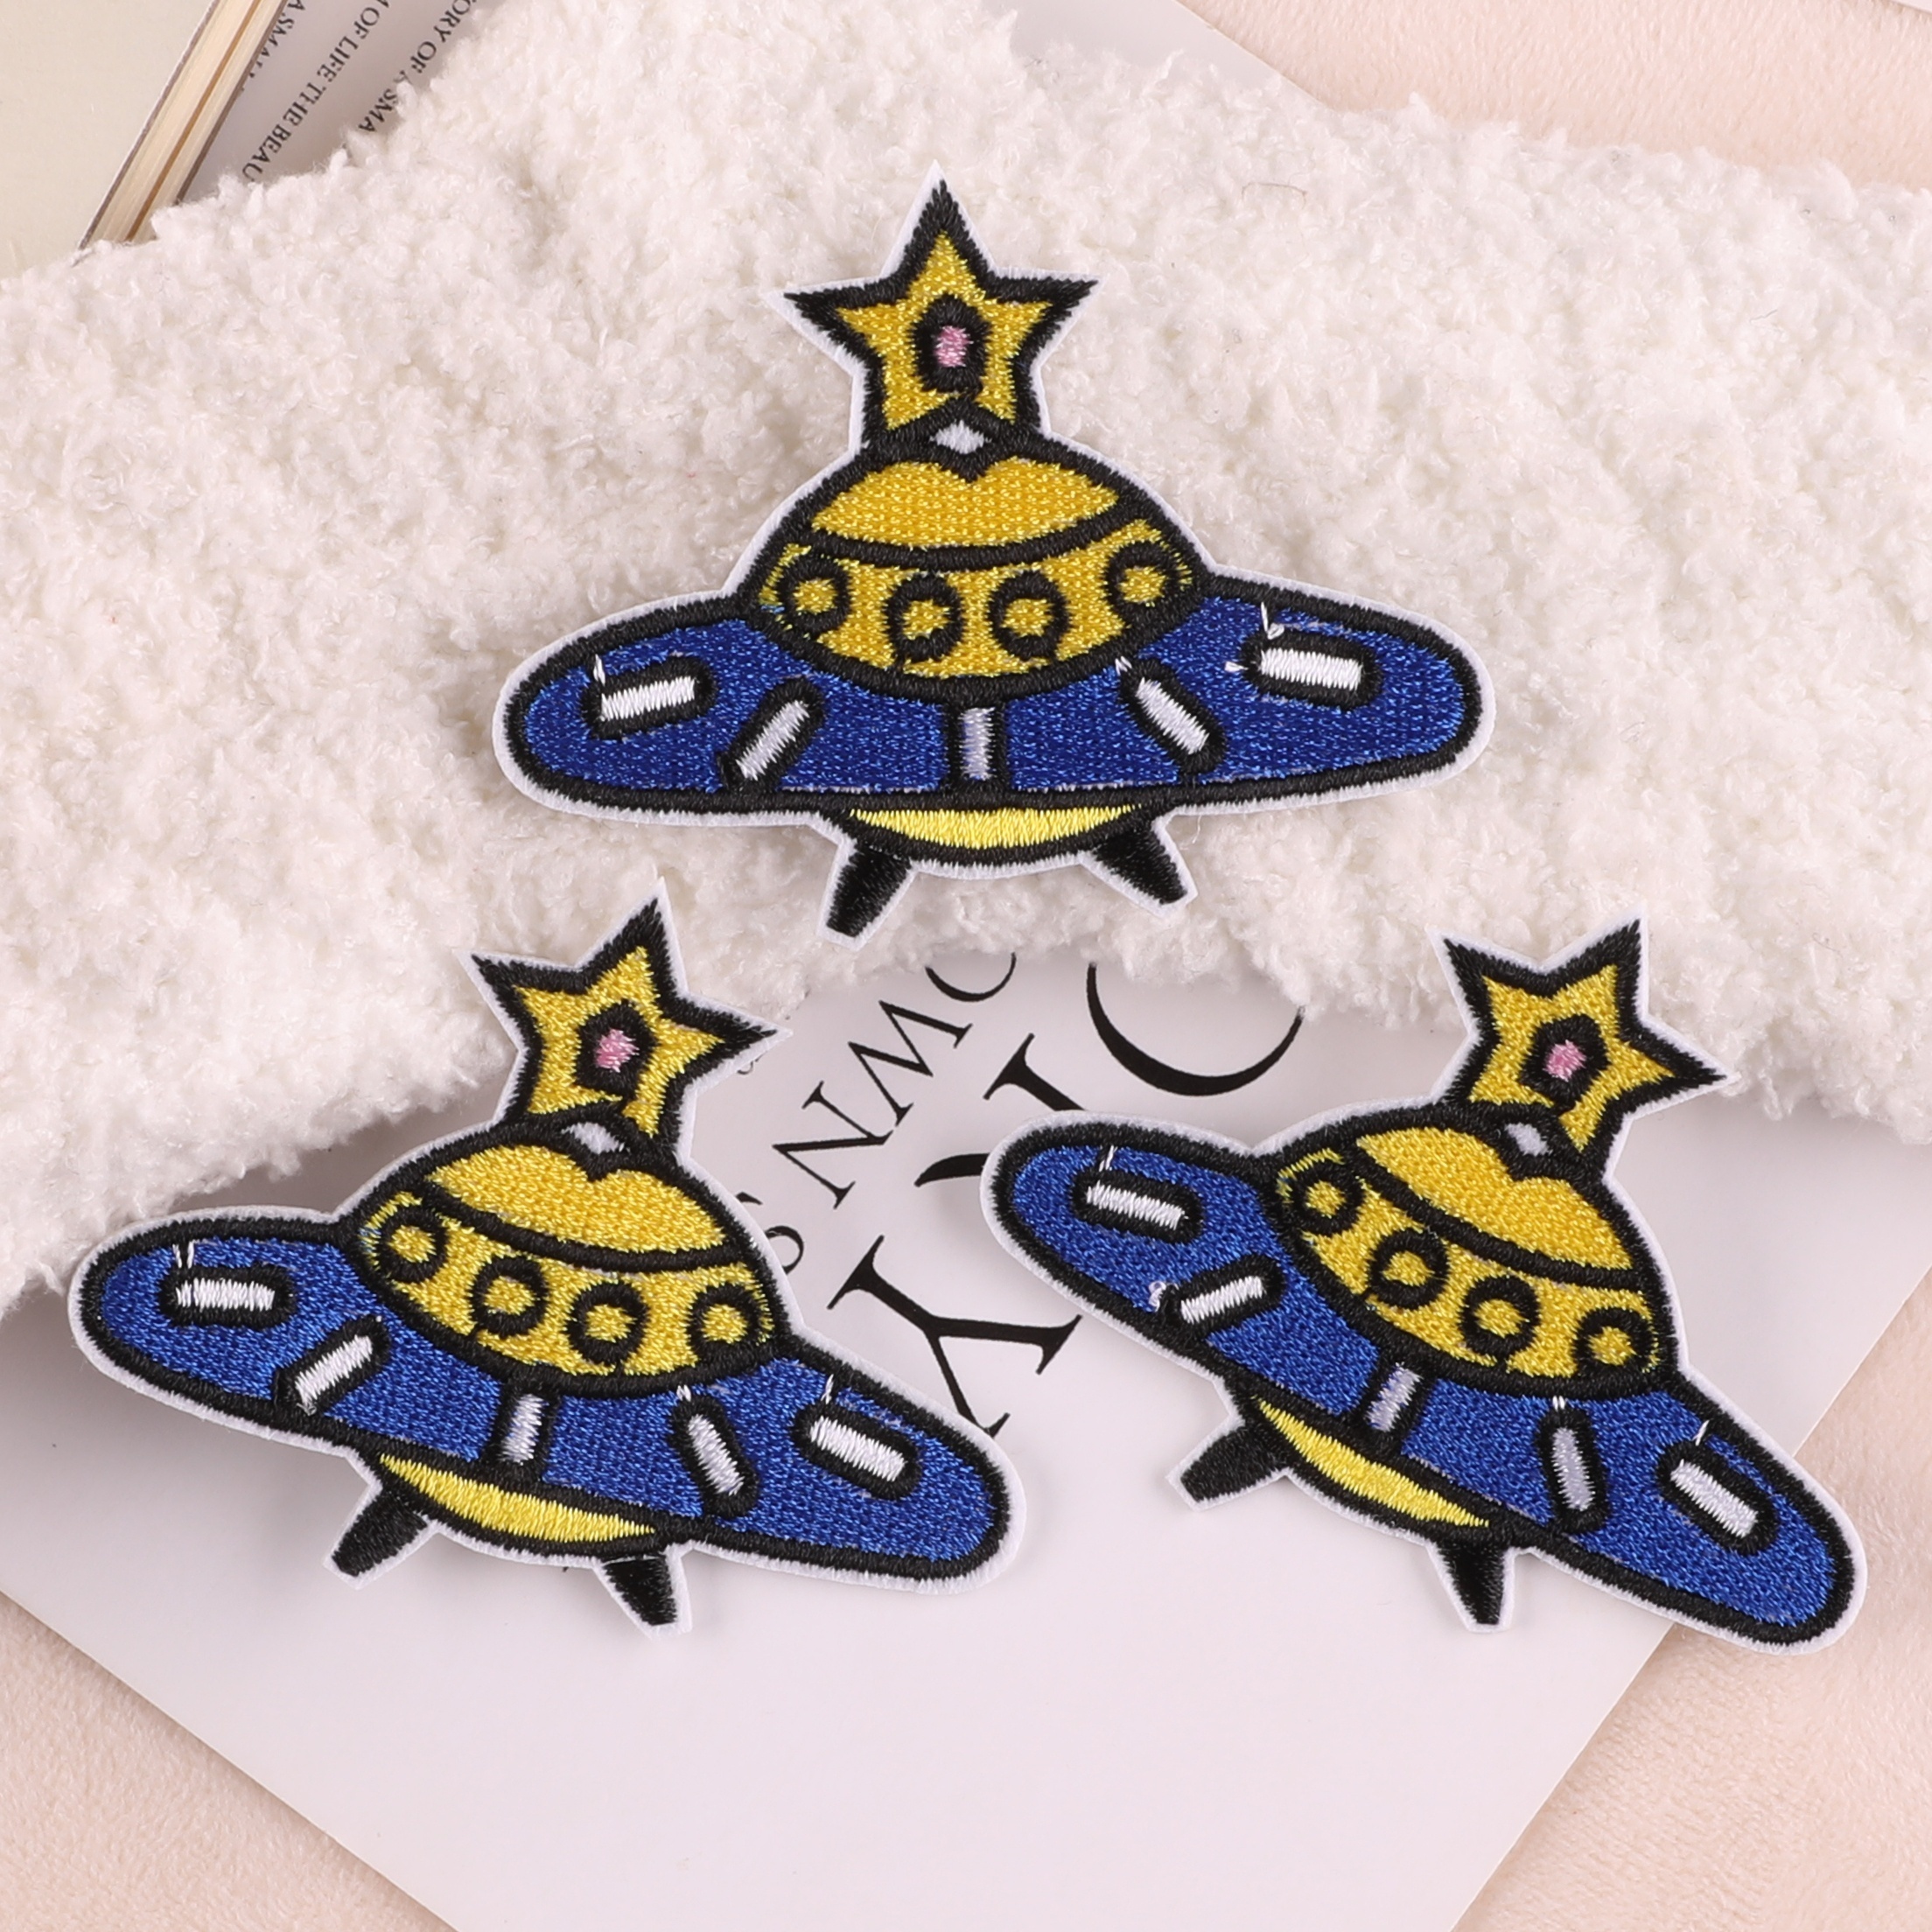 Iron on Patches - Black Star Patch 5 Pcs Iron on Patch Embroidered Applique A-171